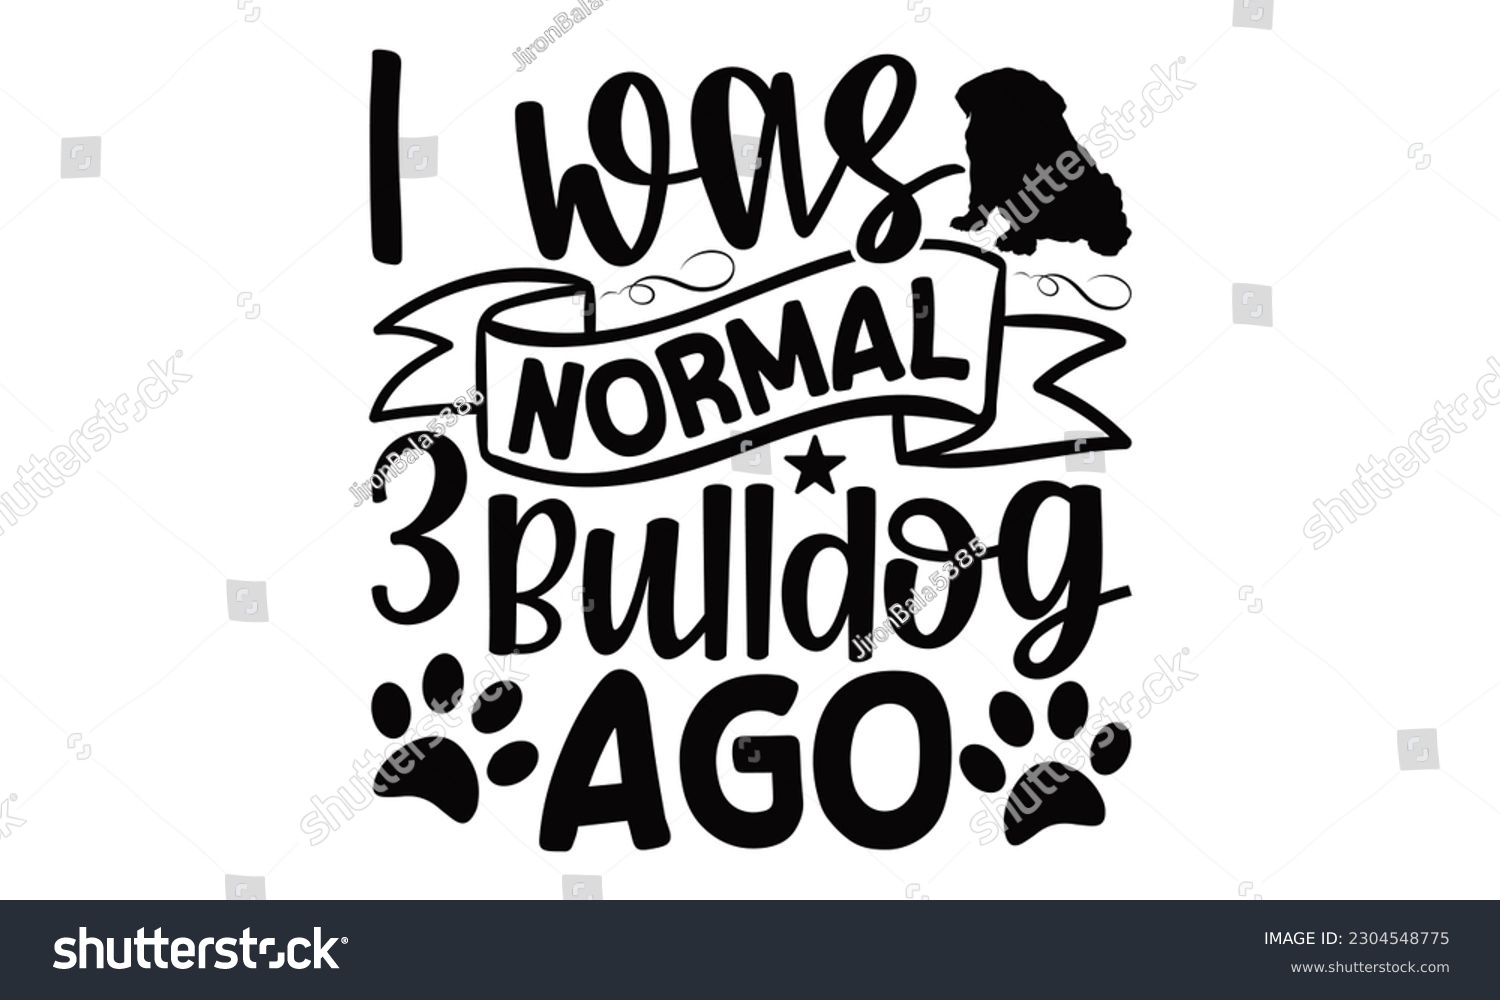 SVG of I Was Normal 3 Bulldog Ago - Bulldog SVG Design, typography design, Illustration for prints on t-shirts, bags, posters and cards, for Cutting Machine, Silhouette Cameo, Cricut. svg